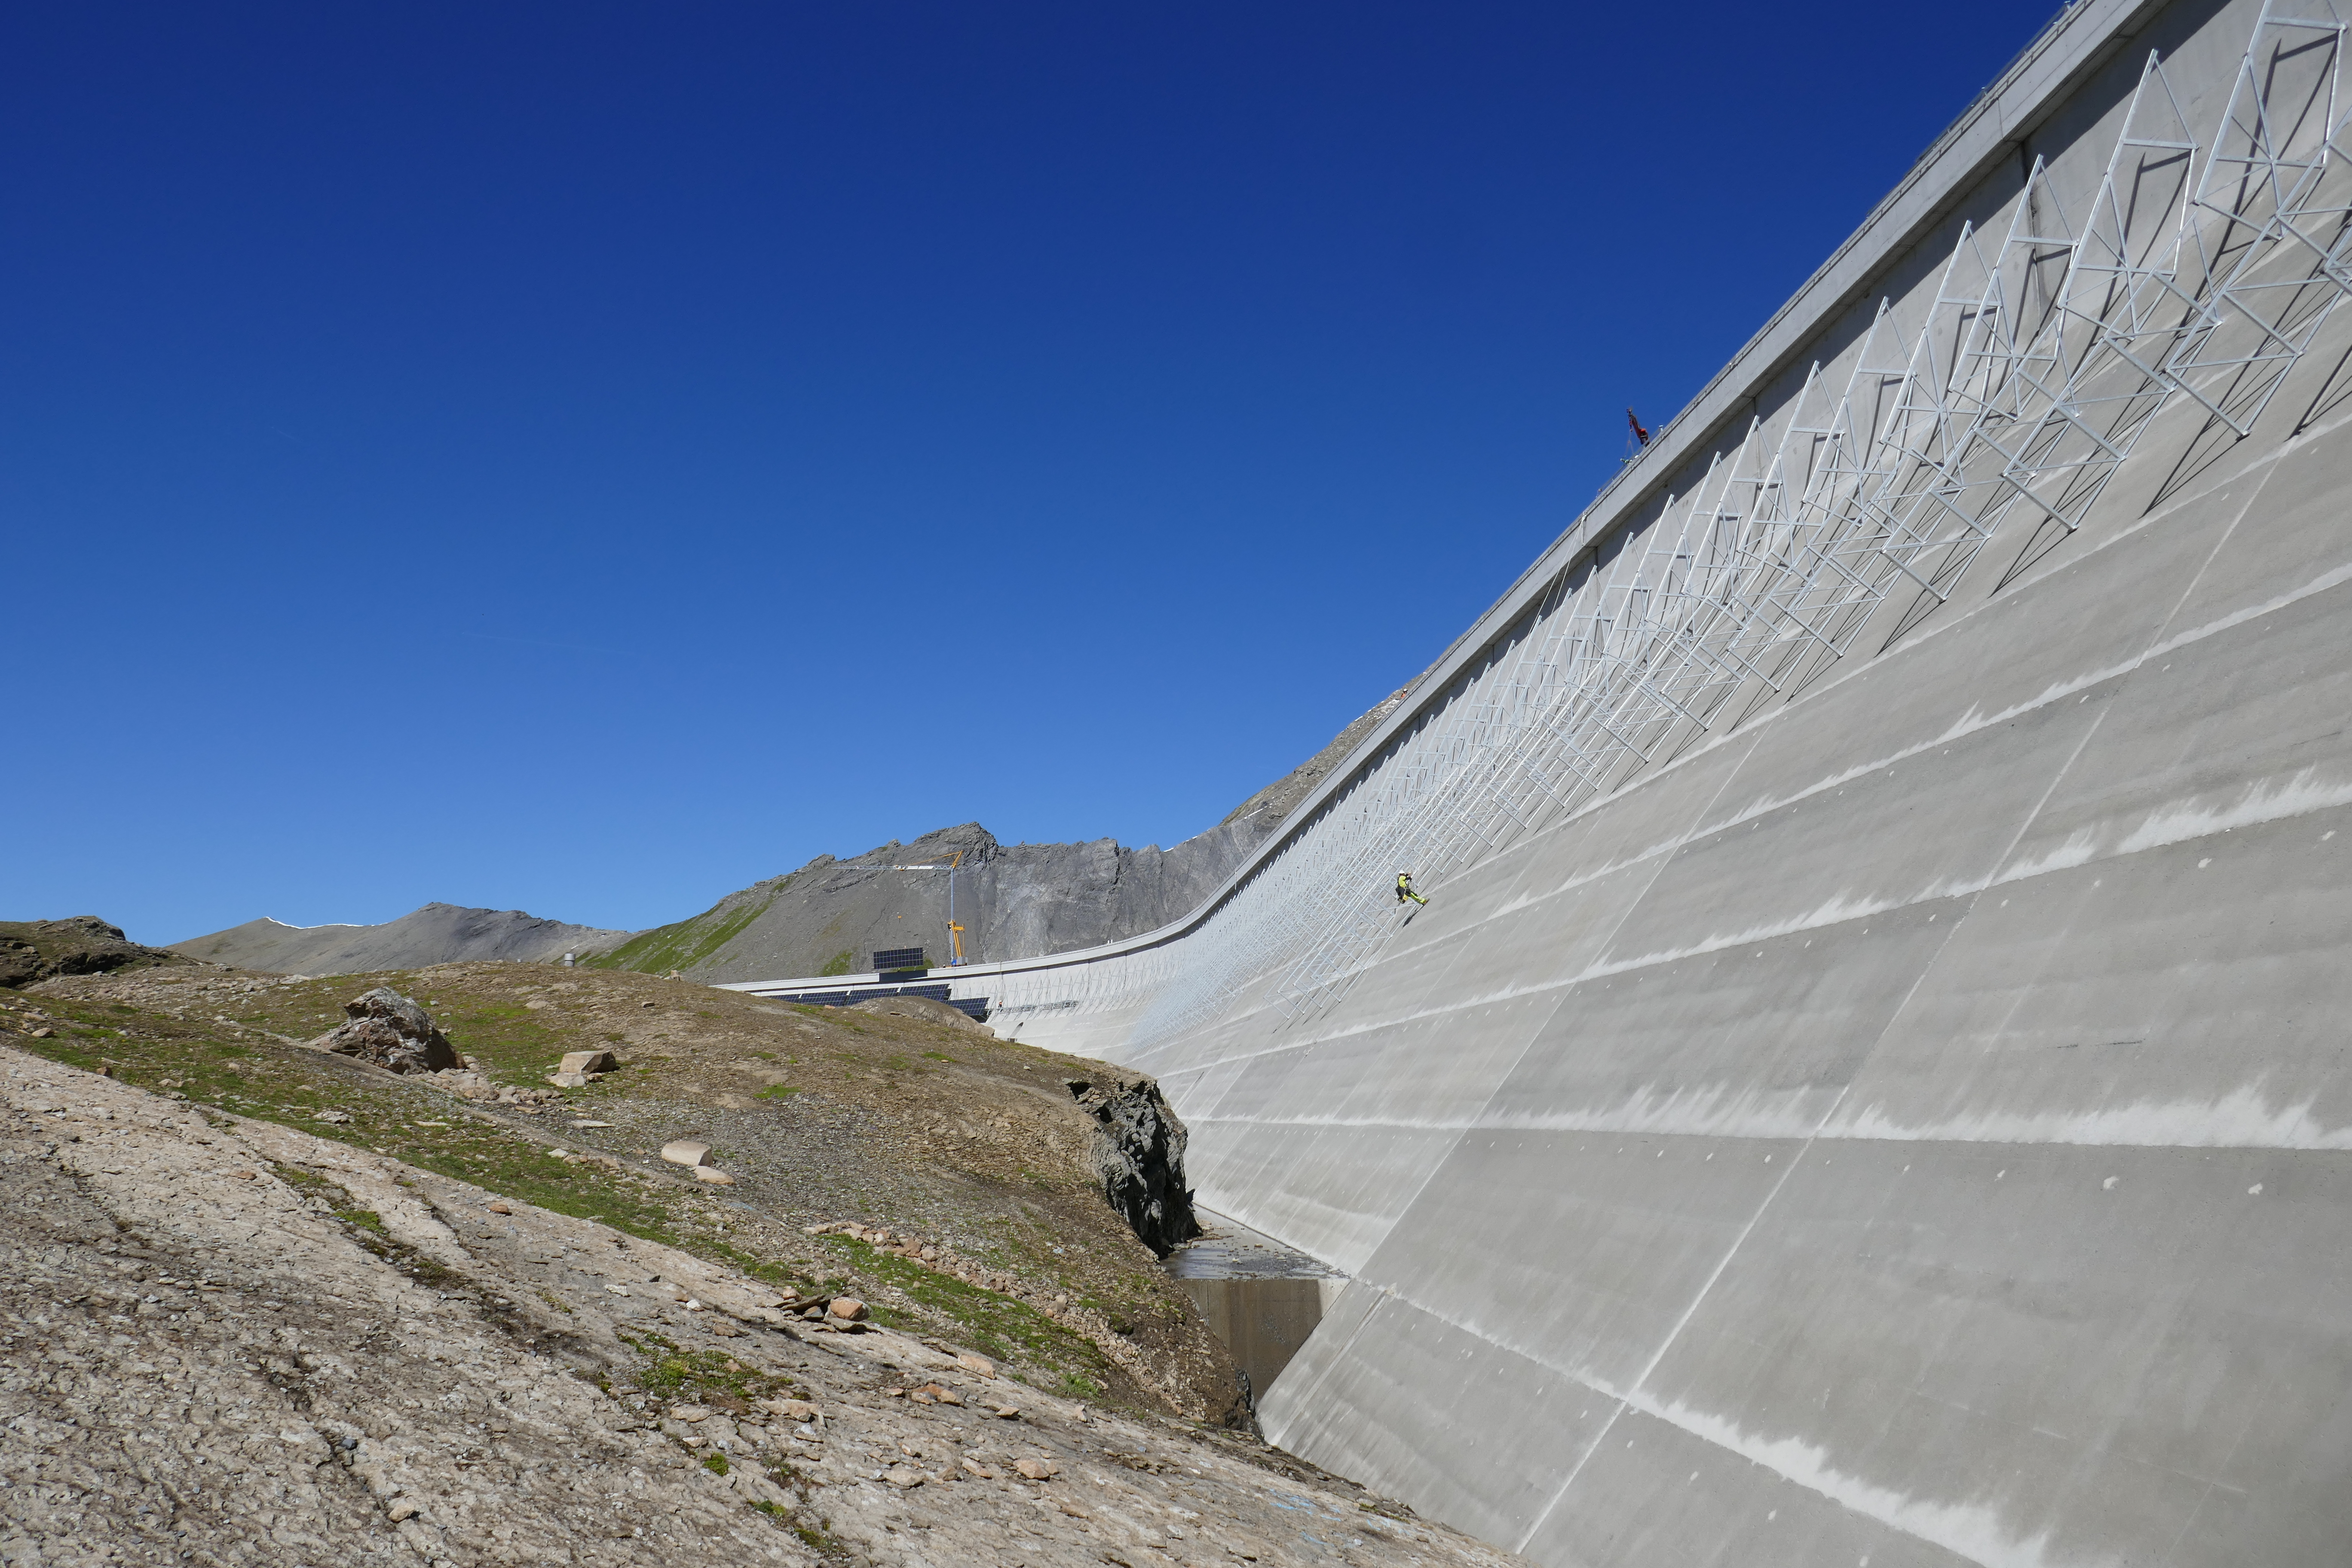 The alpine solar system has been fully connected to the grid since the end of August 2022 and supplies important winter electricity, especially in the cold months.